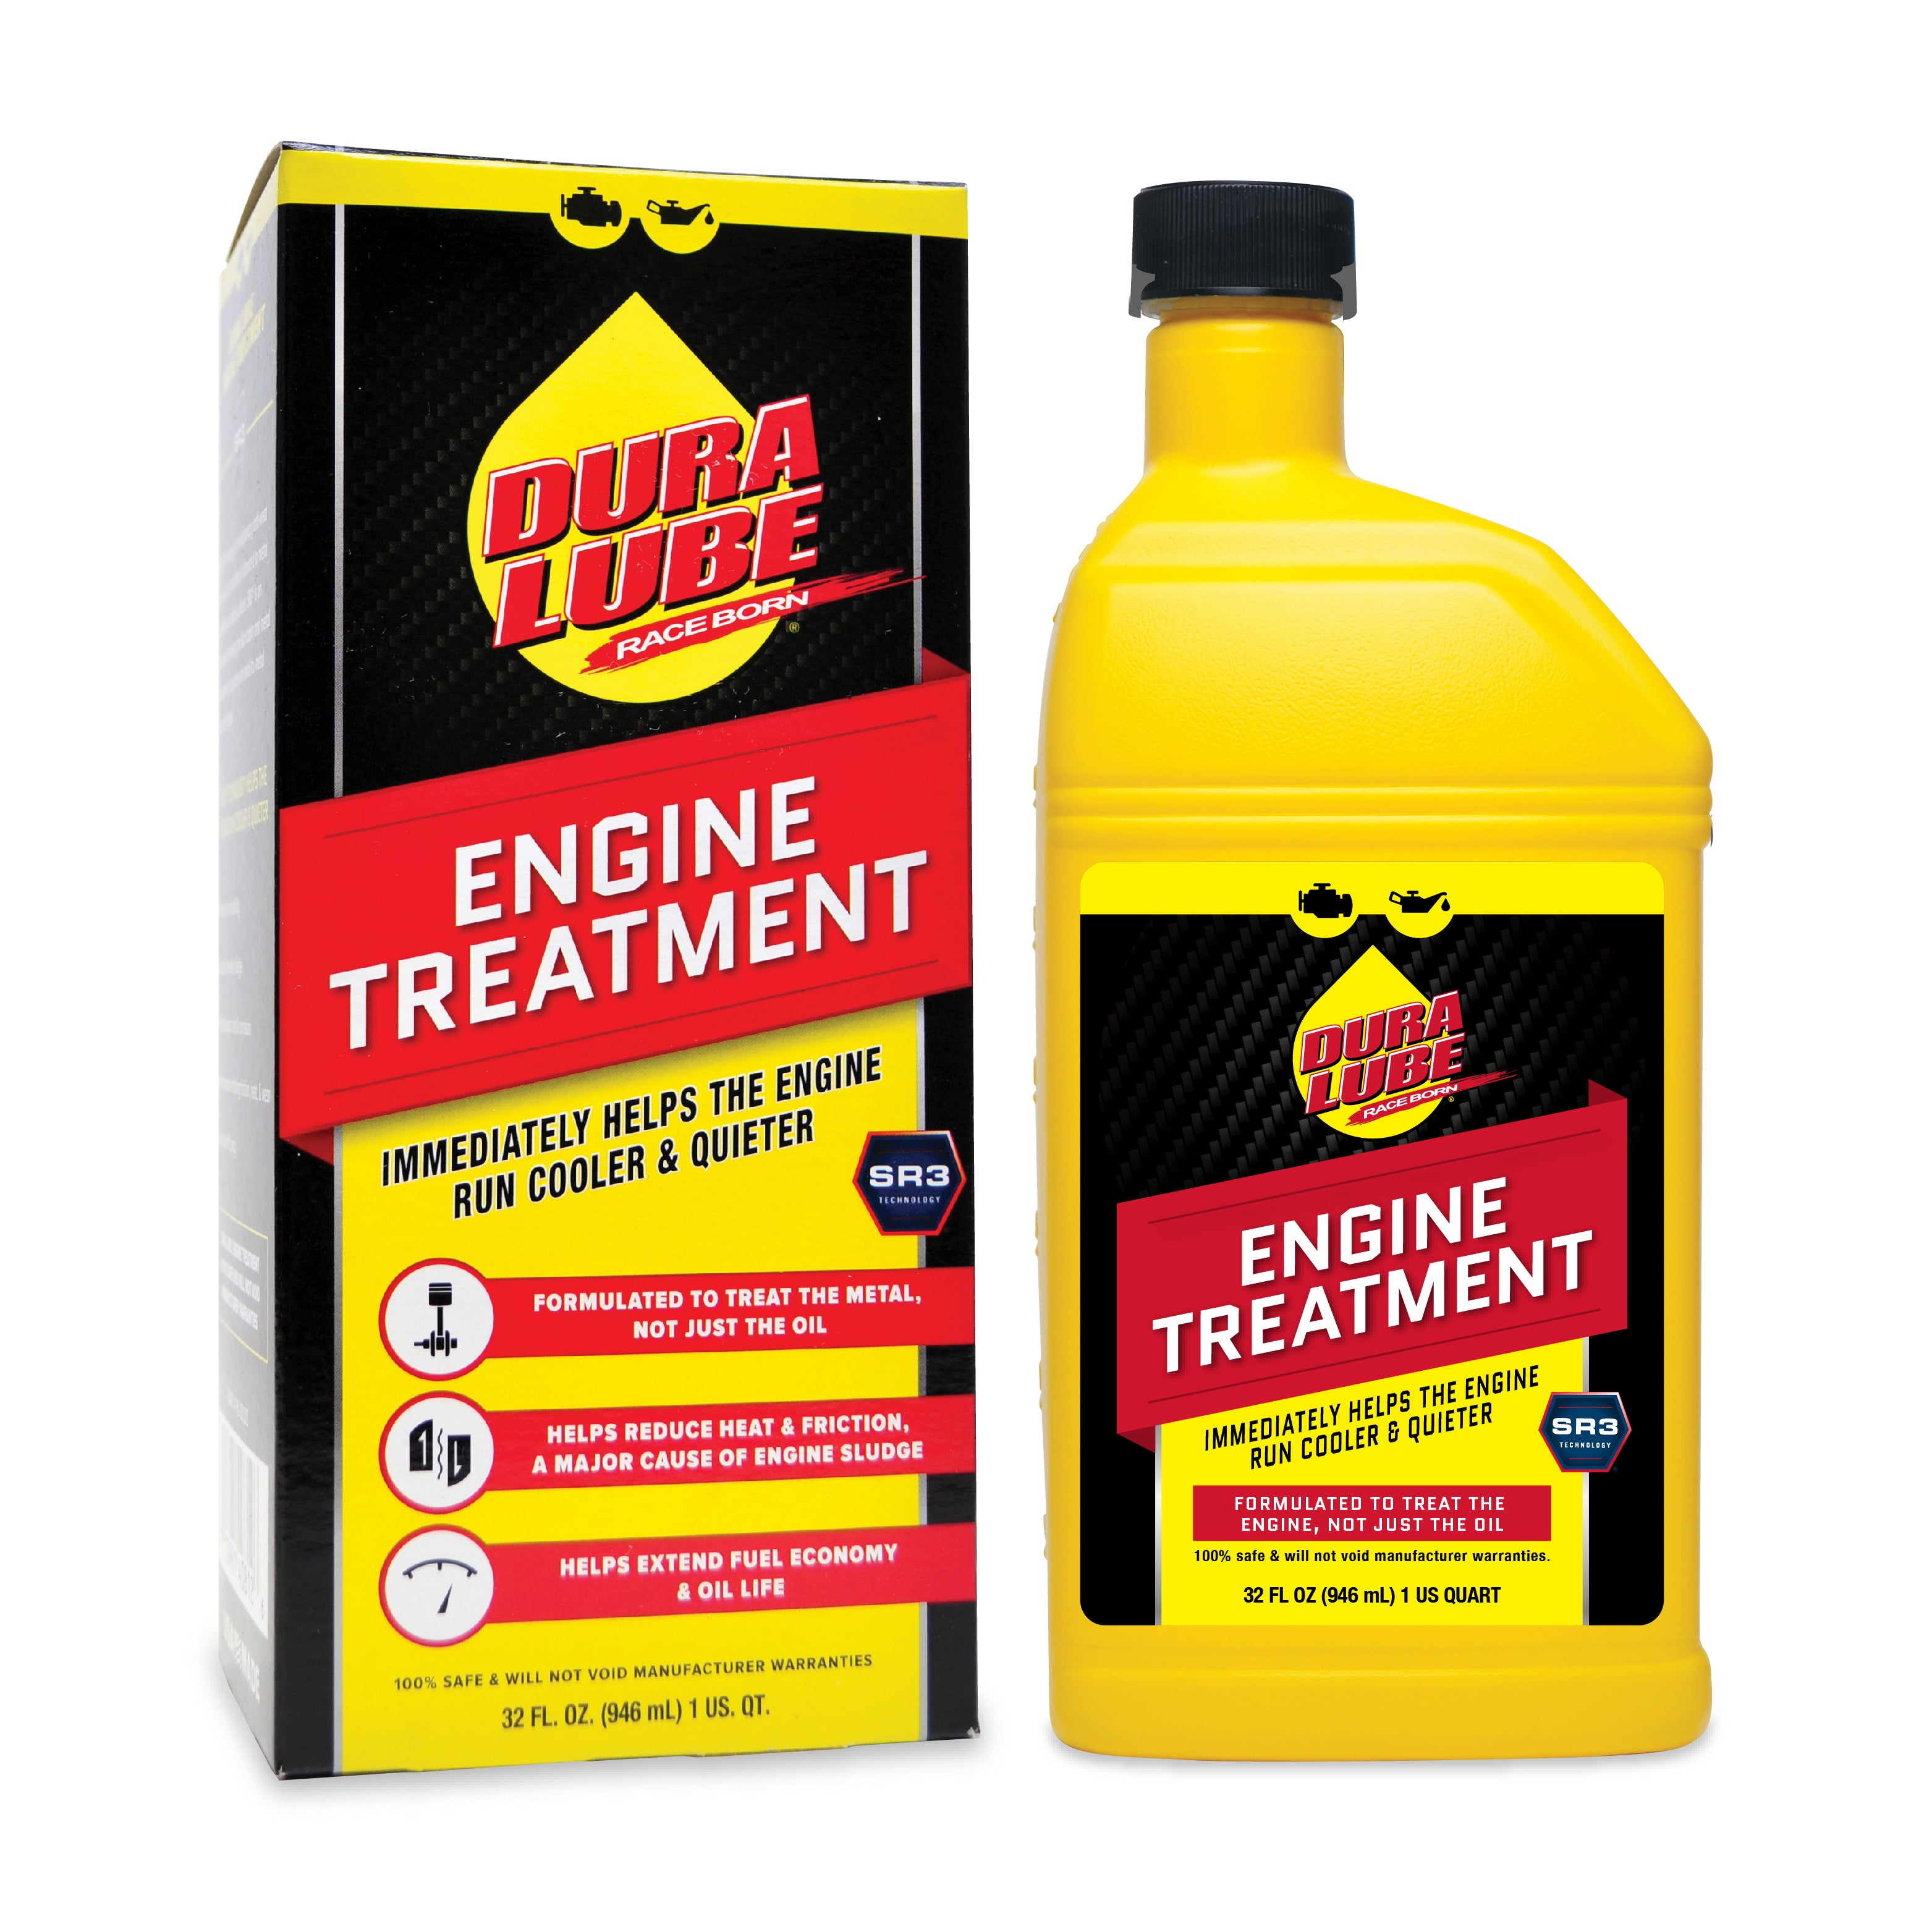 Dura Lube Severe Catalytic and Exhaust Treatment Cleaner Fuel Additive, 16  fl. oz., (PN: HL-402409 PDQ3)